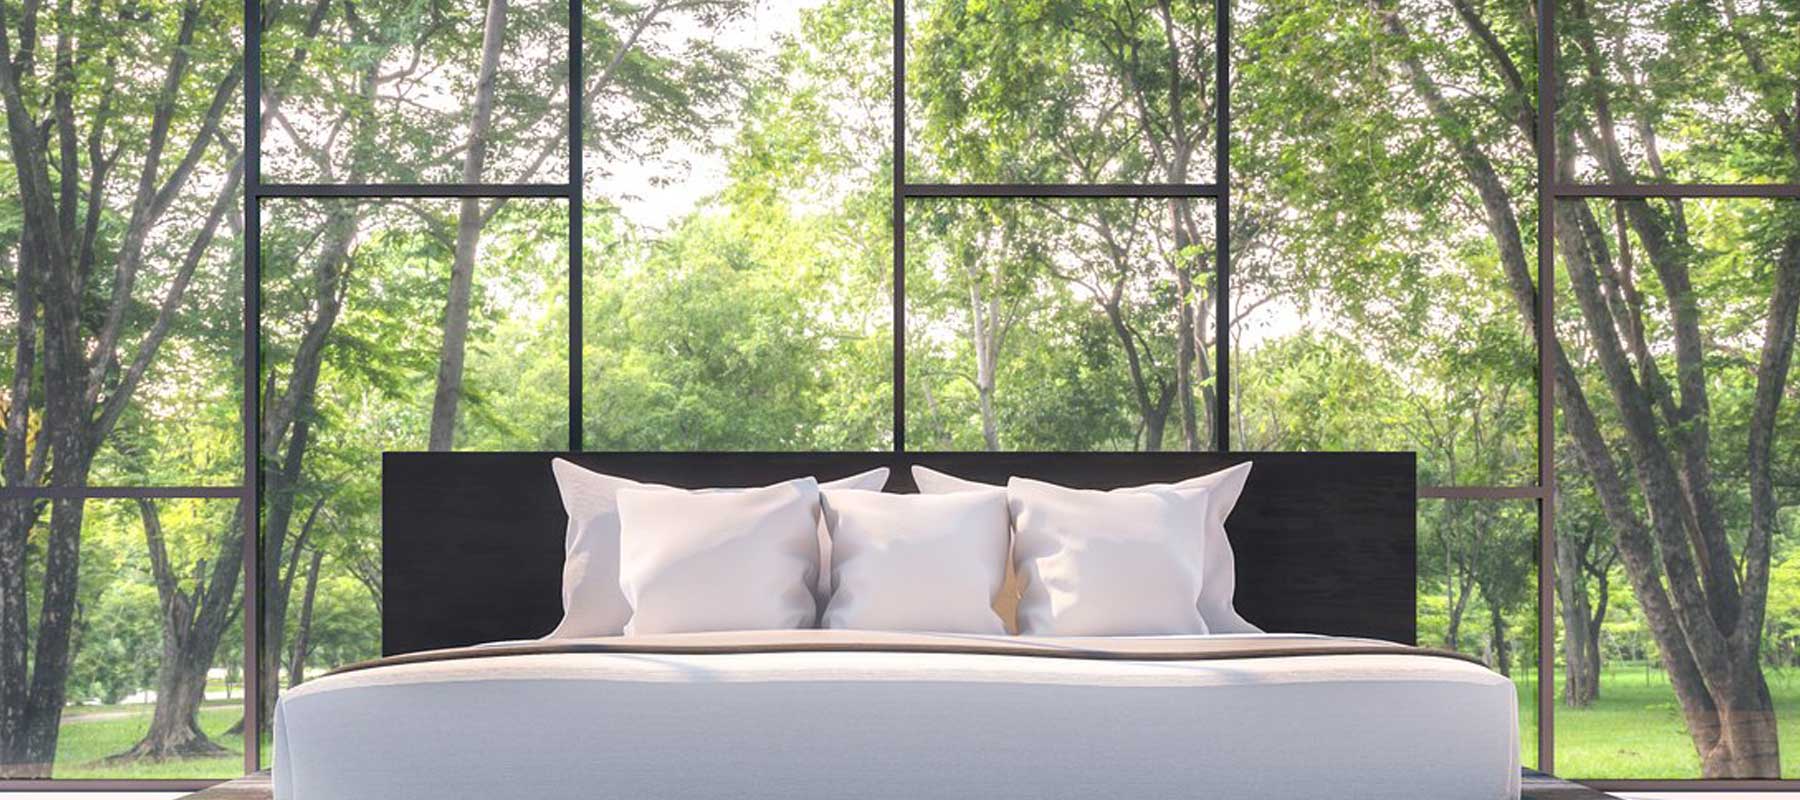 Oversized bed in front of big windows that look out into the trees. 